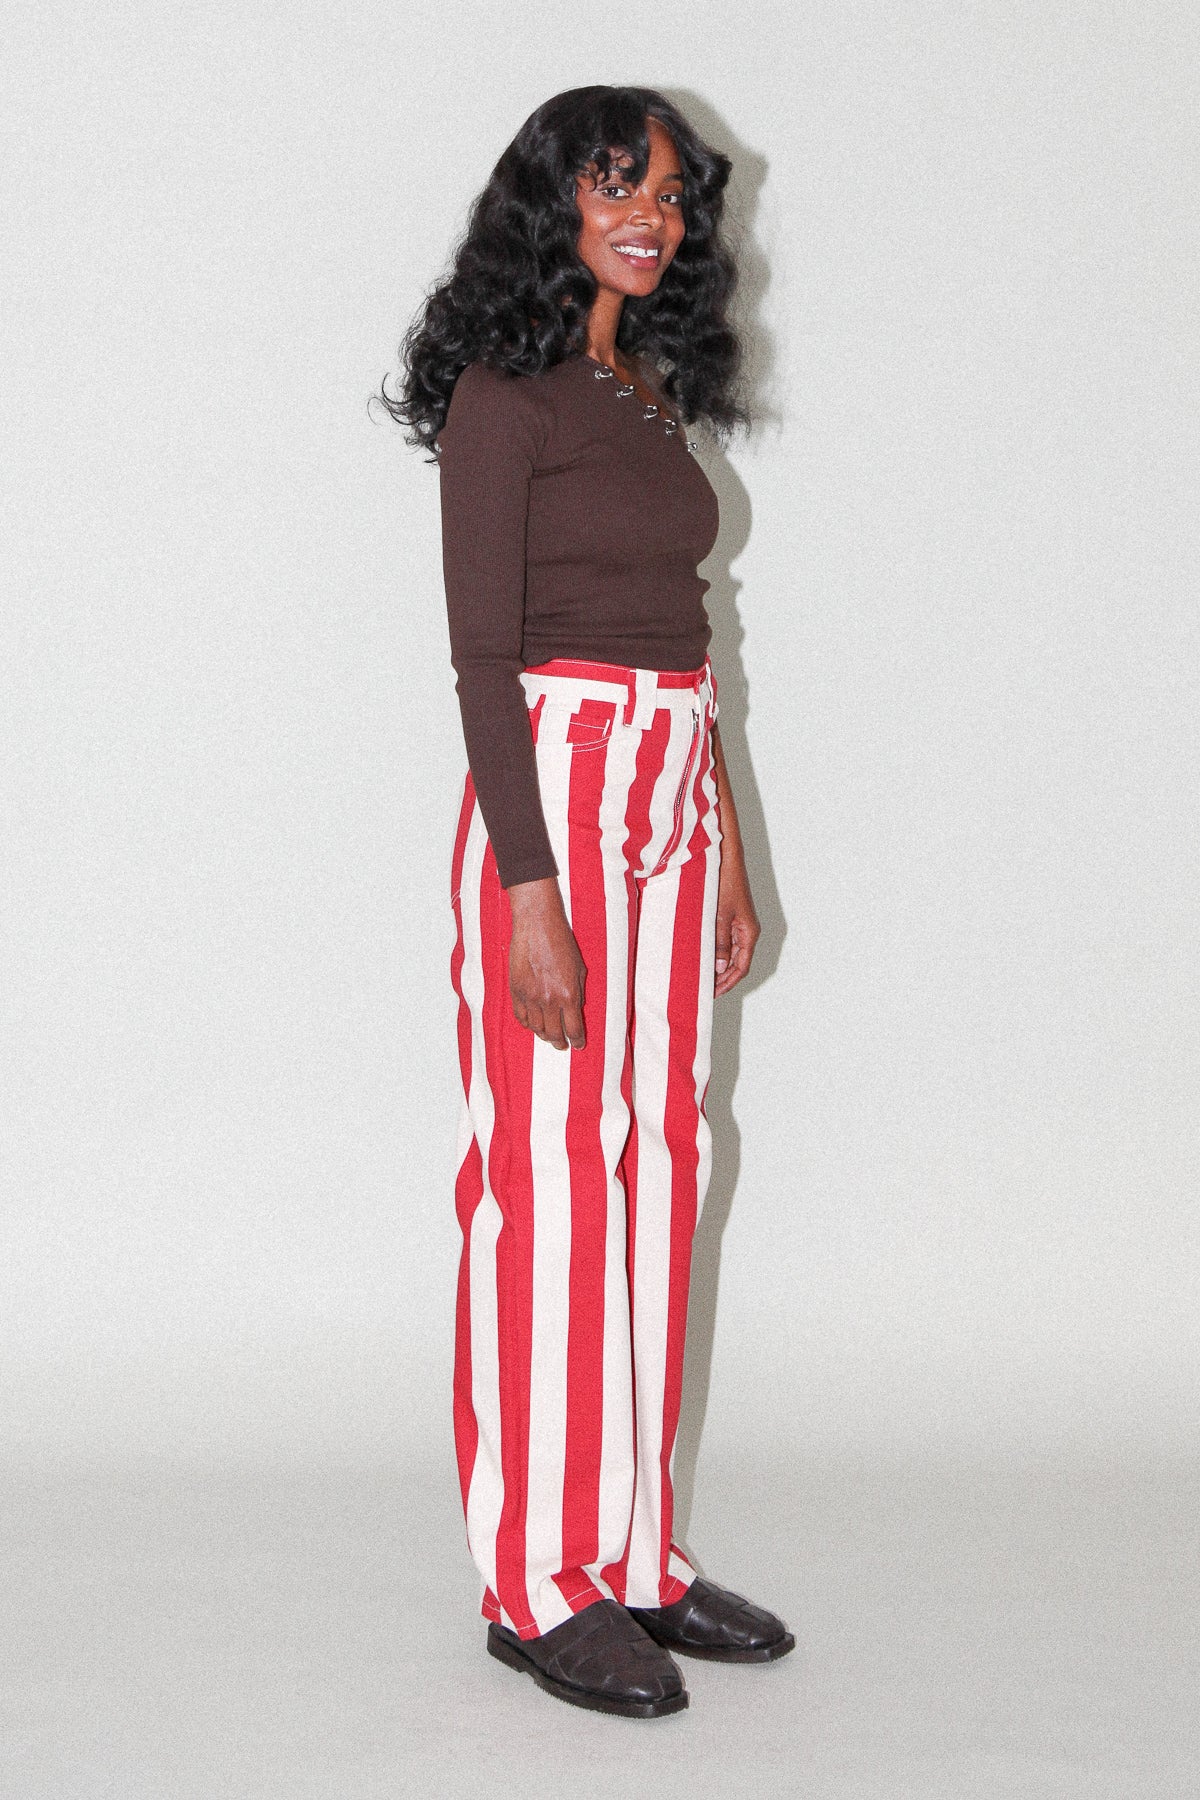 Unelma Meteor Pant in Cherry & Natural Stripe